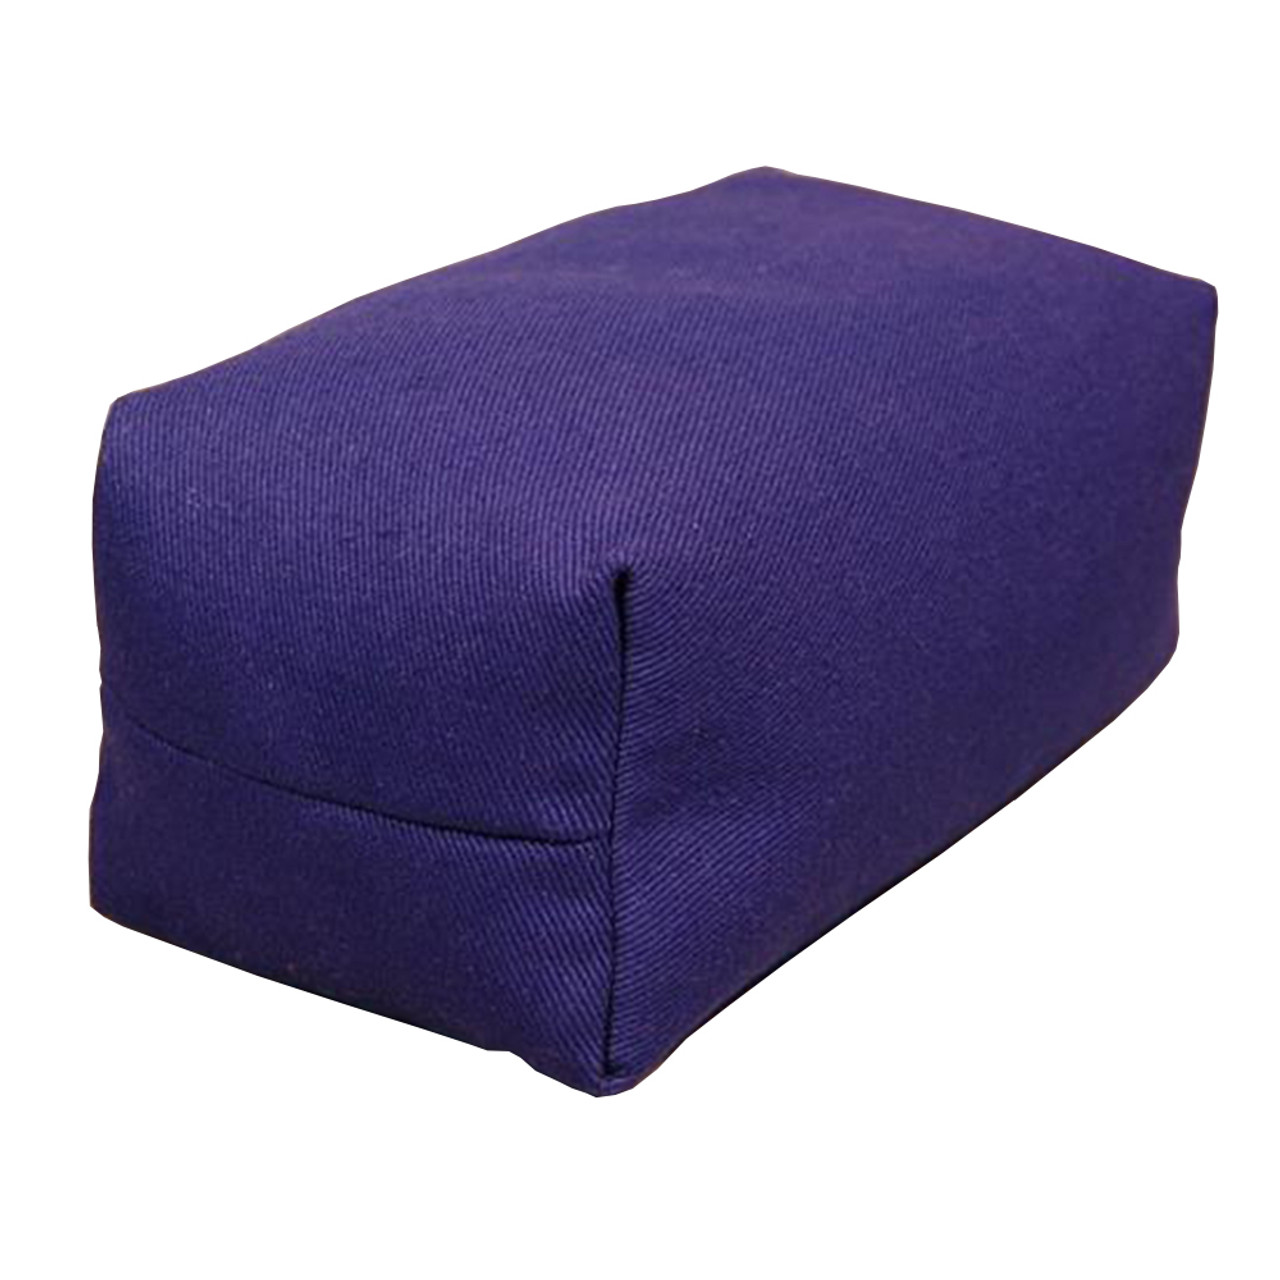 https://cdn11.bigcommerce.com/s-nw401/images/stencil/1280x1280/products/94/974/knee_pillow__82430.1389927084.jpg?c=2